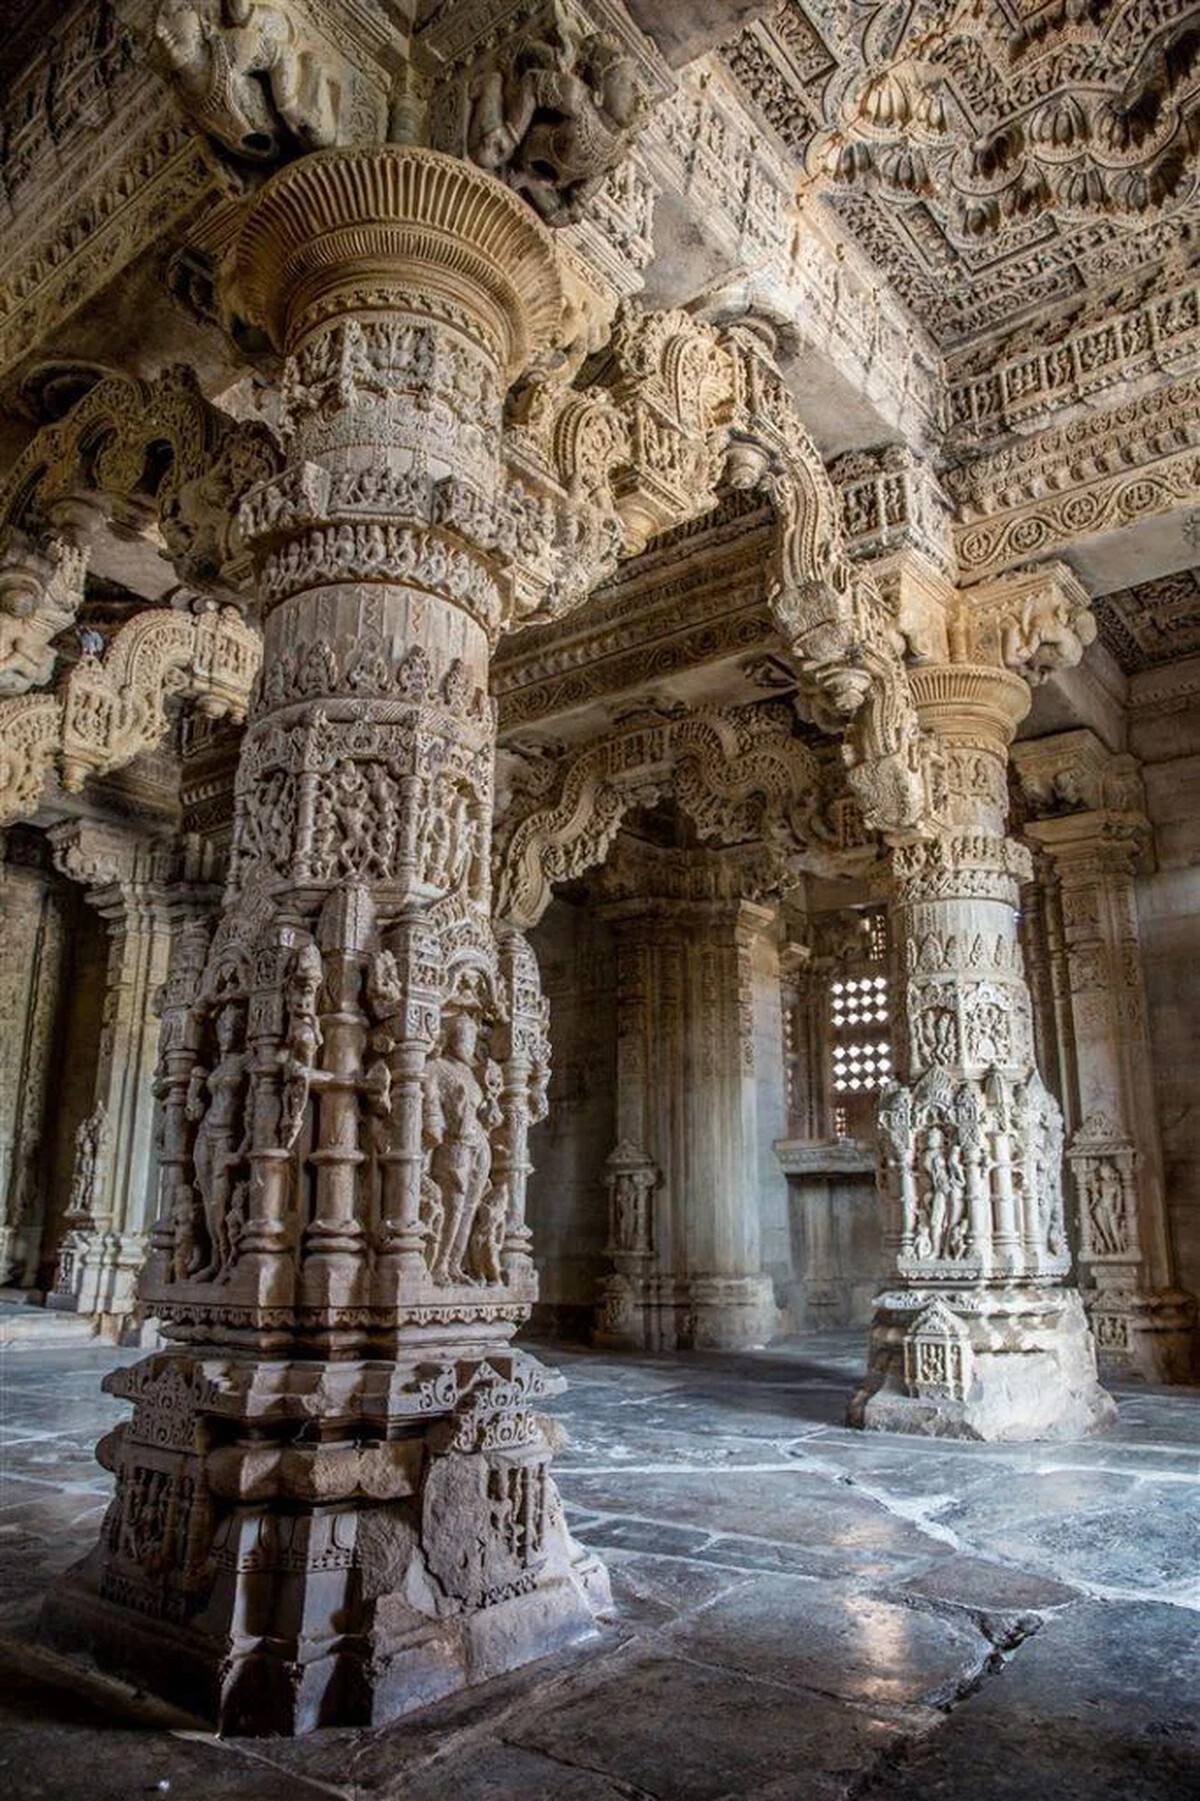 Sahasra Bahu Temple, A 1100-Year-Old Temple In India